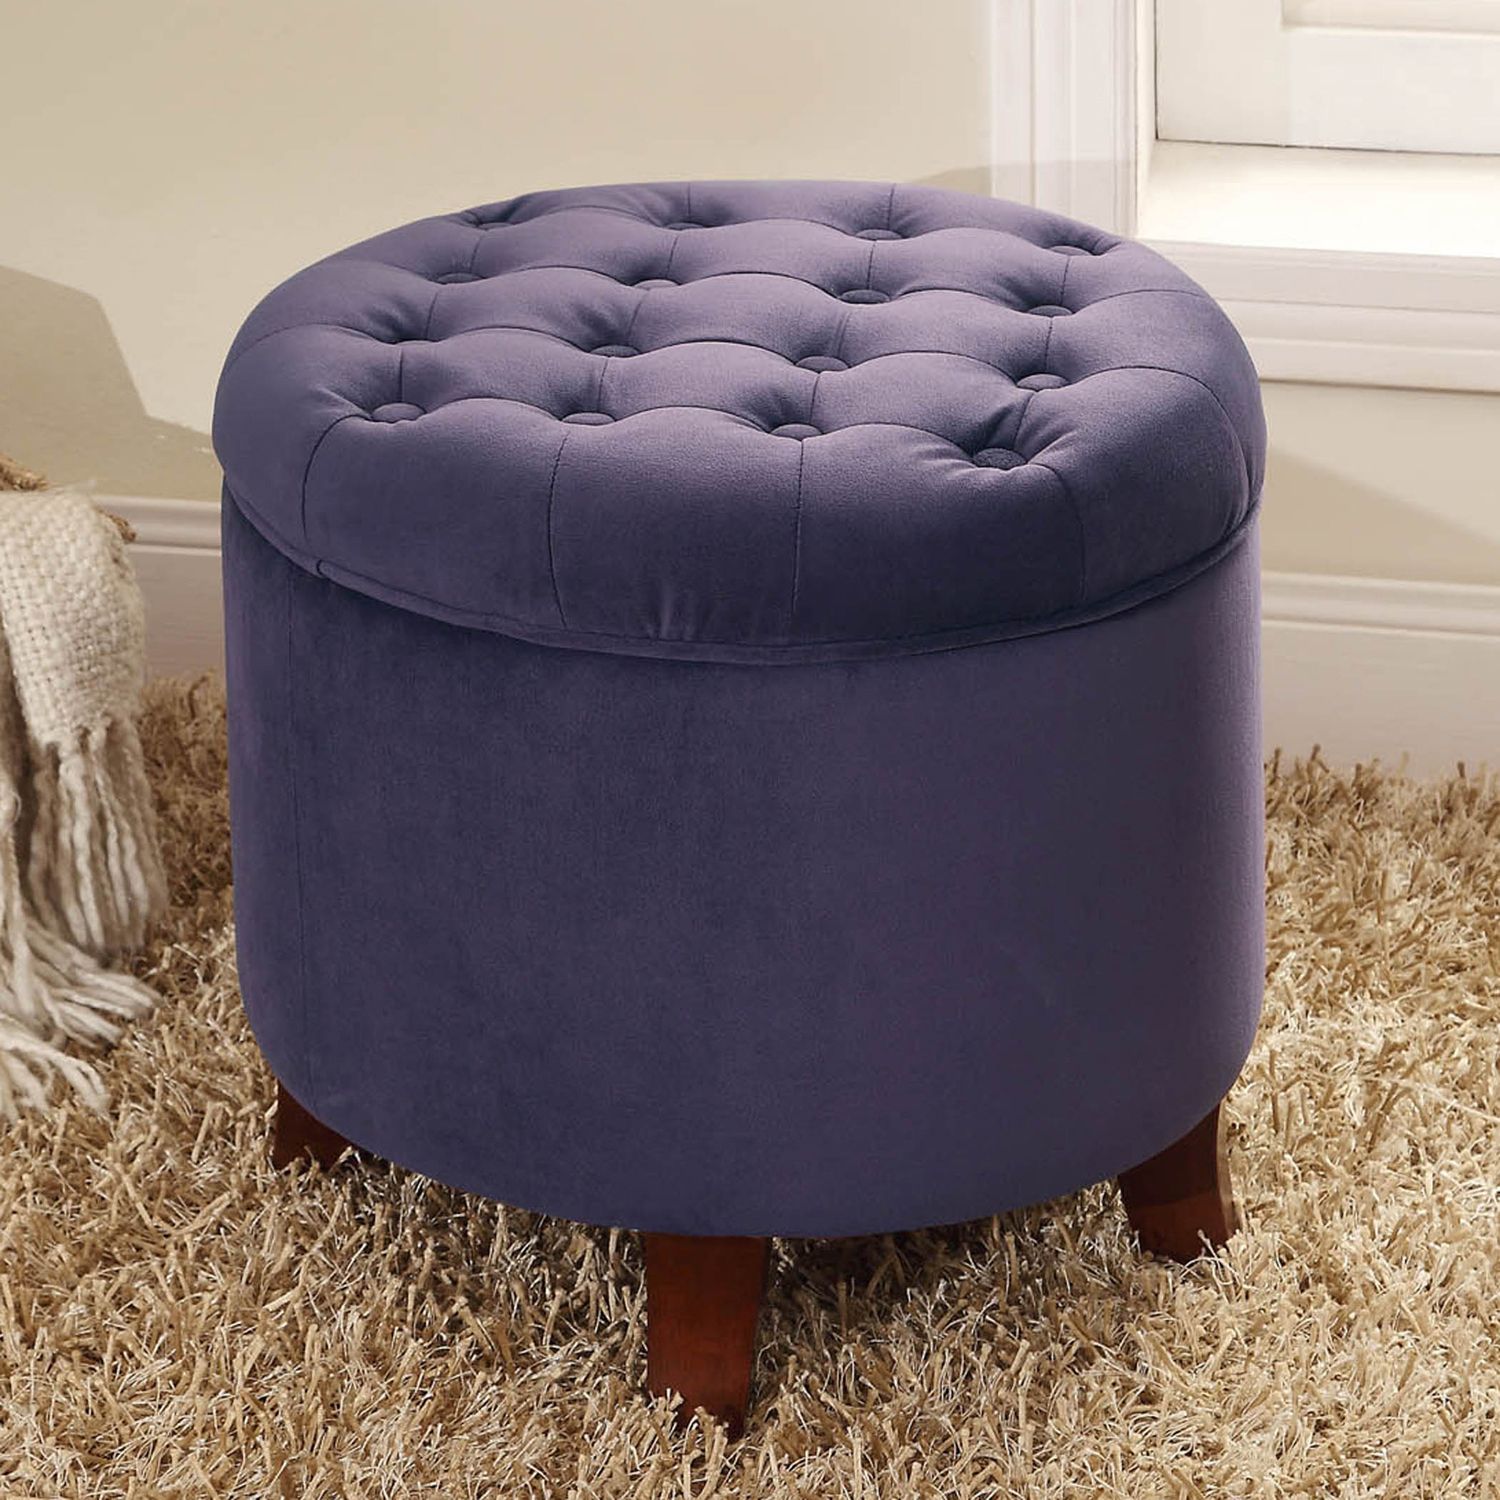 Purple Velvet Tufted Round Storage Ottoman – Pier1 Imports Pertaining To Fabric Tufted Storage Ottomans (View 2 of 20)